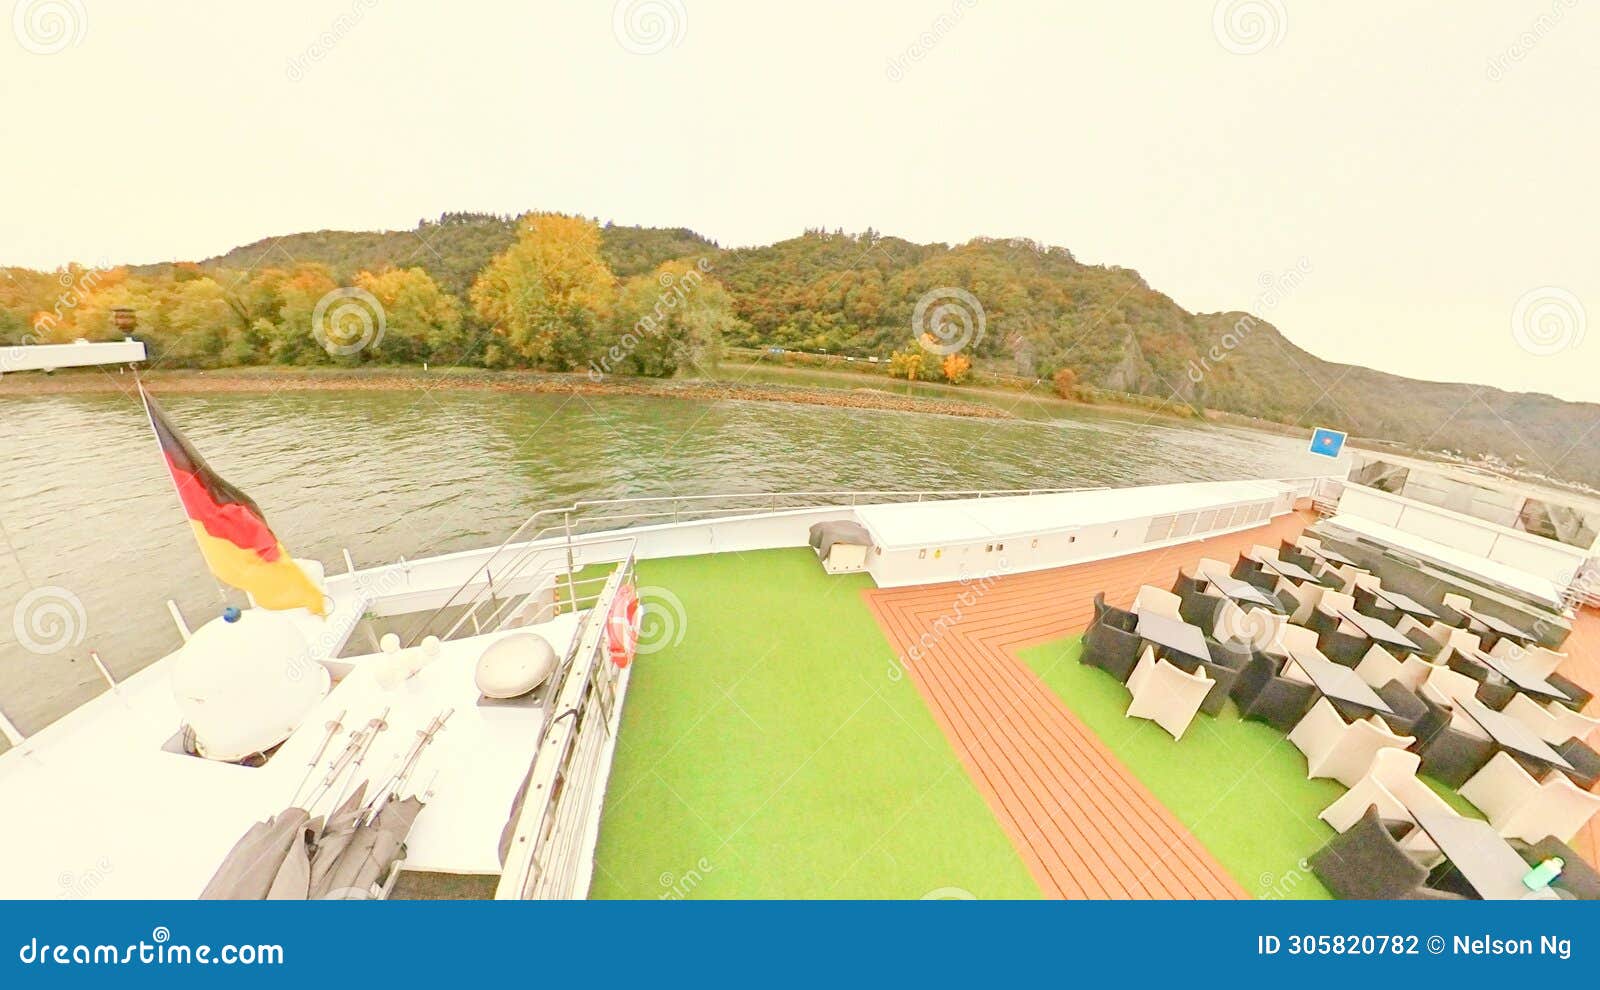 beautiful sceneries, historical houses castles , commercial ships along rhine danube river